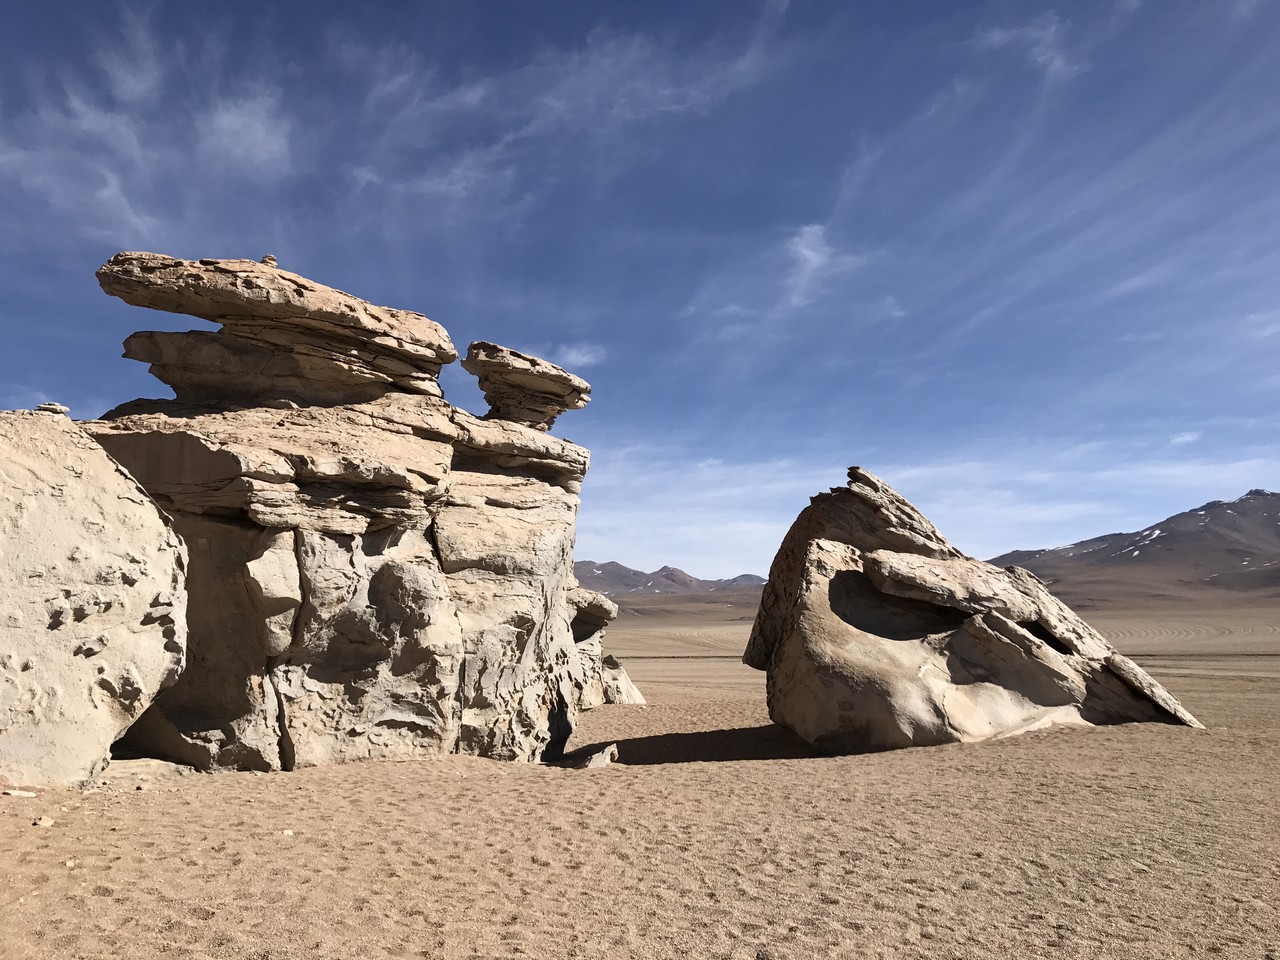 a rock formations in a desert